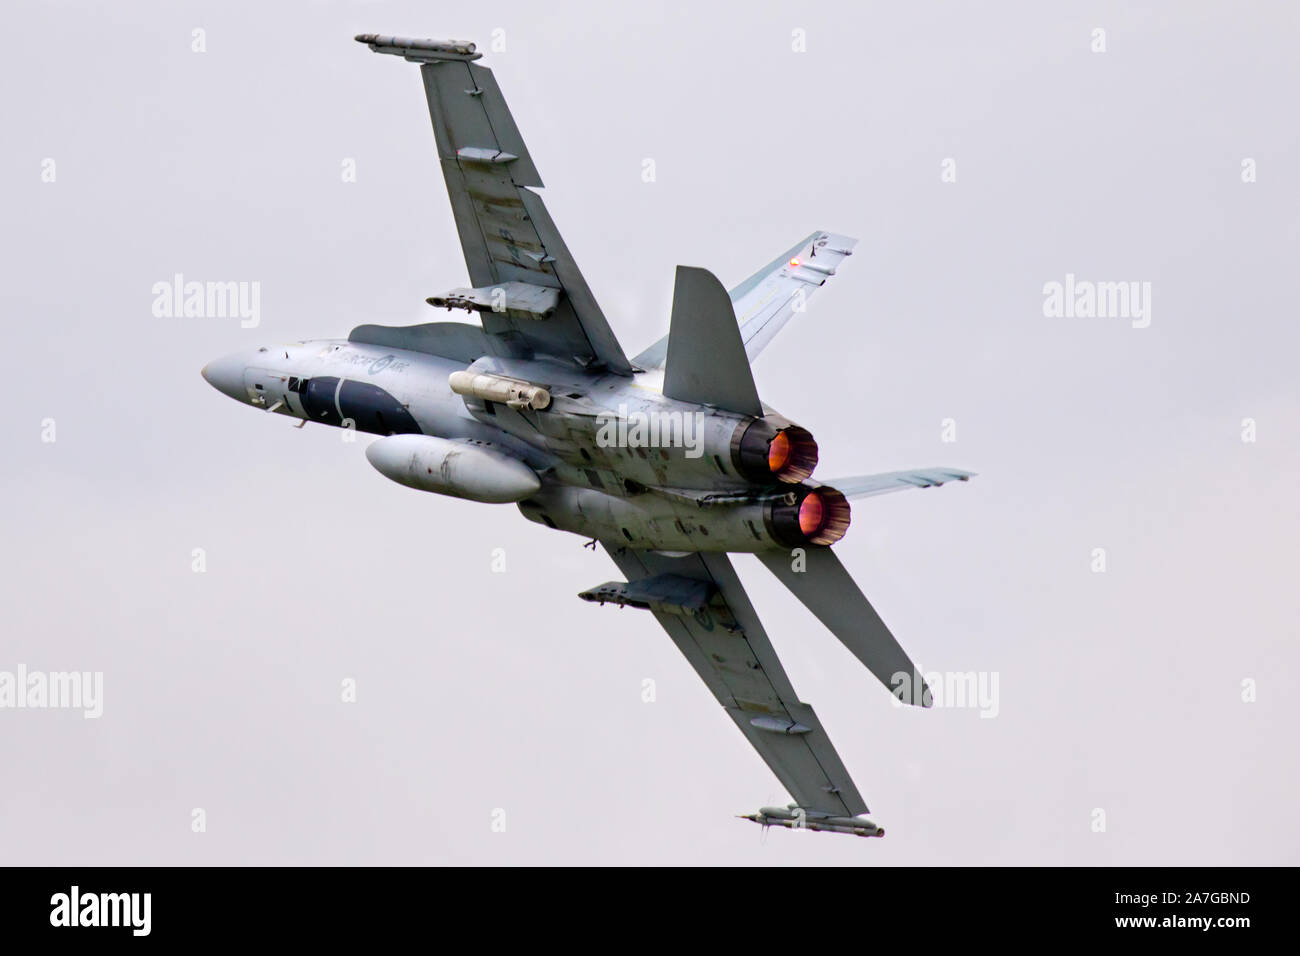 A McDonnell Douglas CF-18 Hornet, during a flyby, as it powers up and away from the spectators at Airshow London, in London, Ontario, Canada. Stock Photo